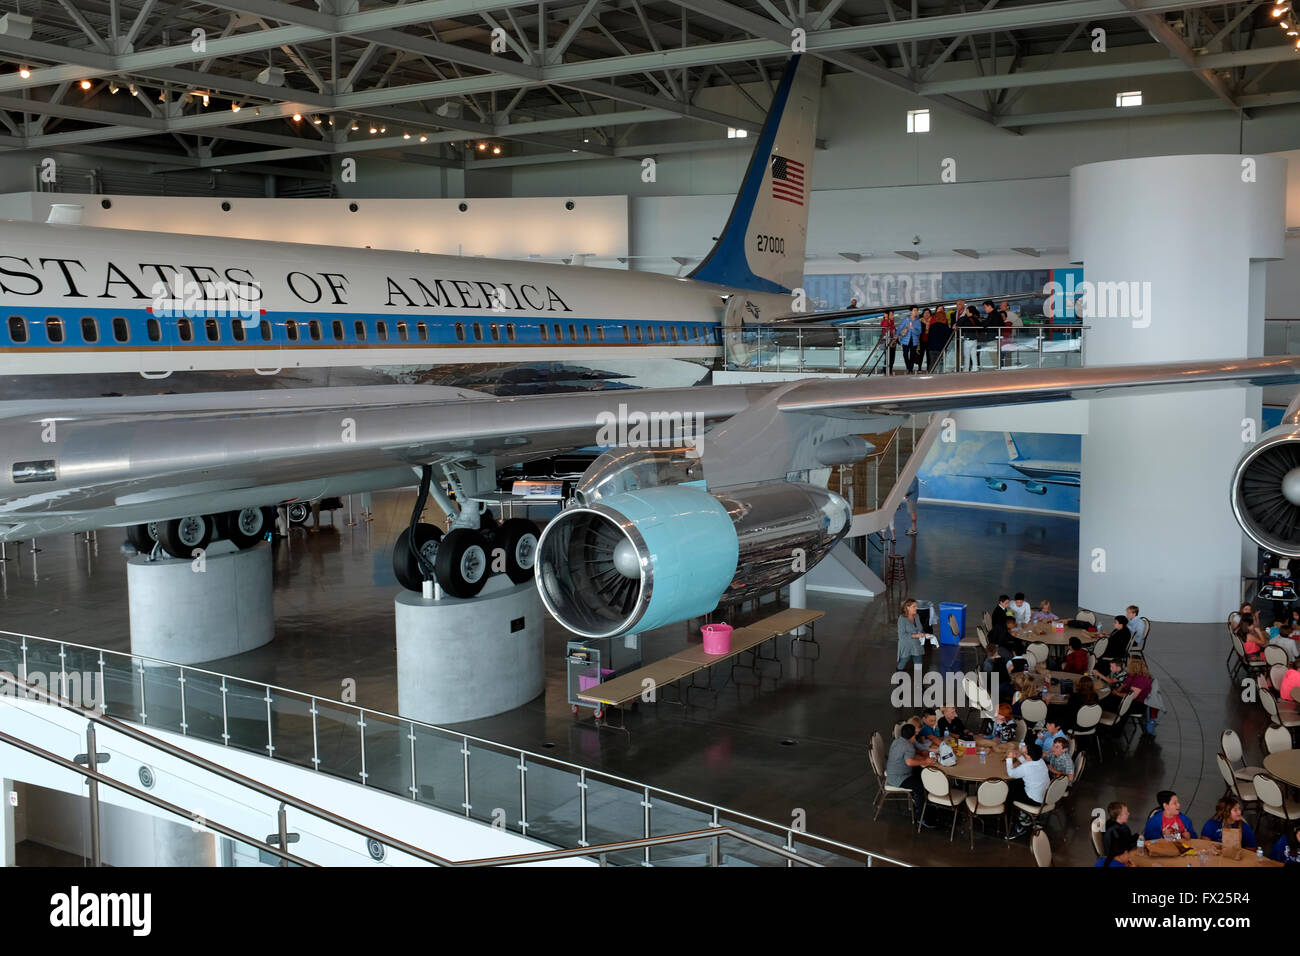 Retired Air Force One in Ronald Reagan Presidential Library and Museum, Simi Valley, California Stock Photo